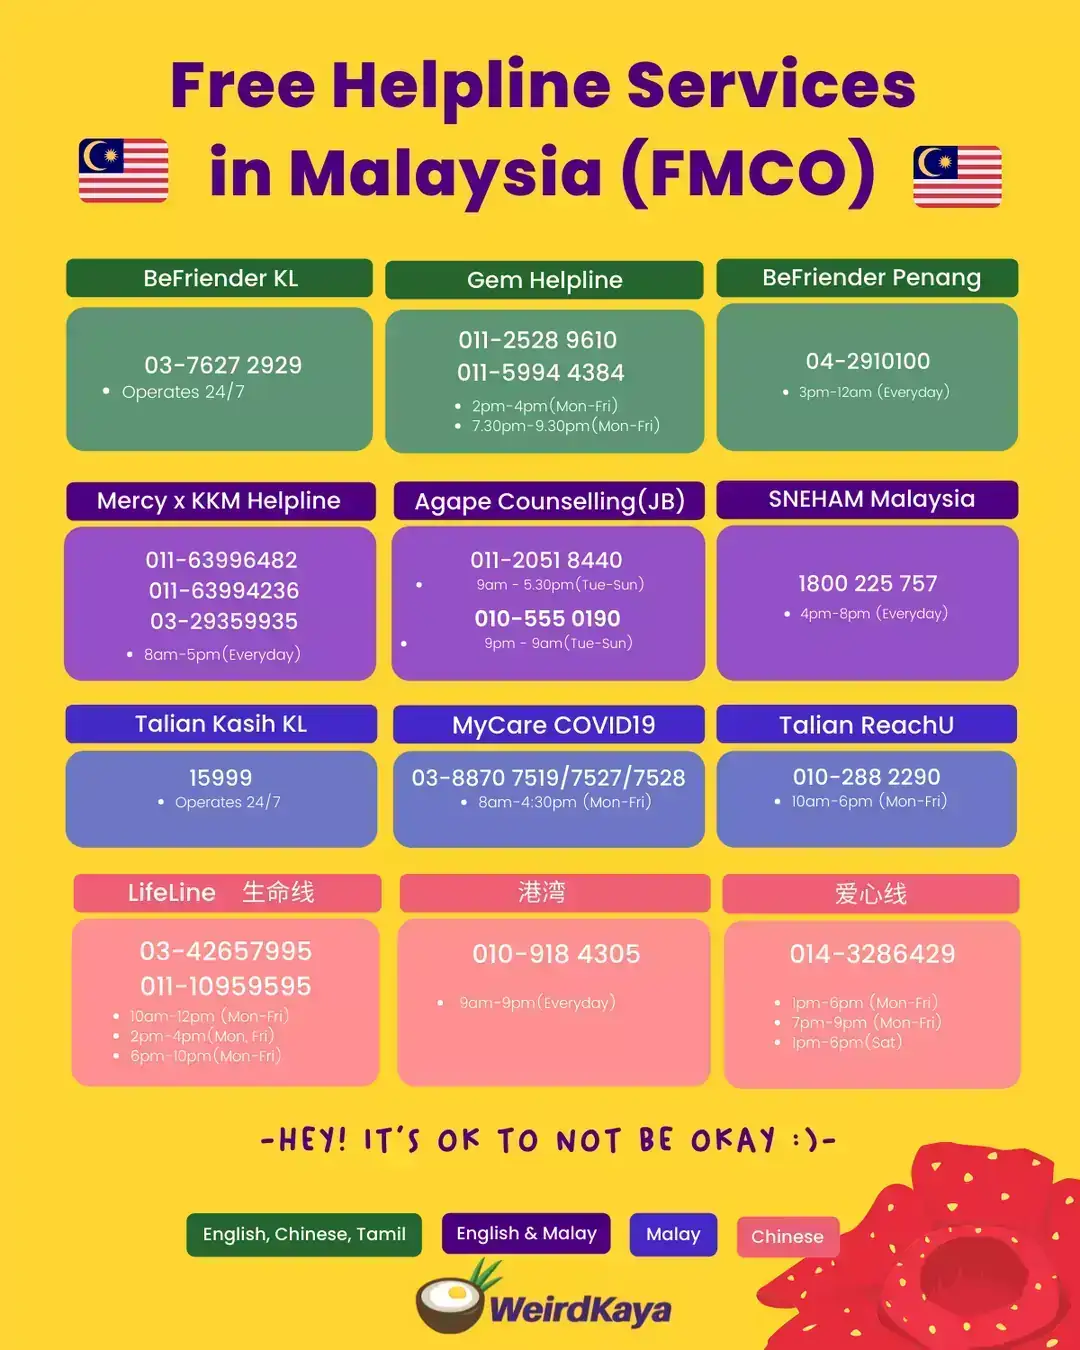 Free helpline services in malaysia